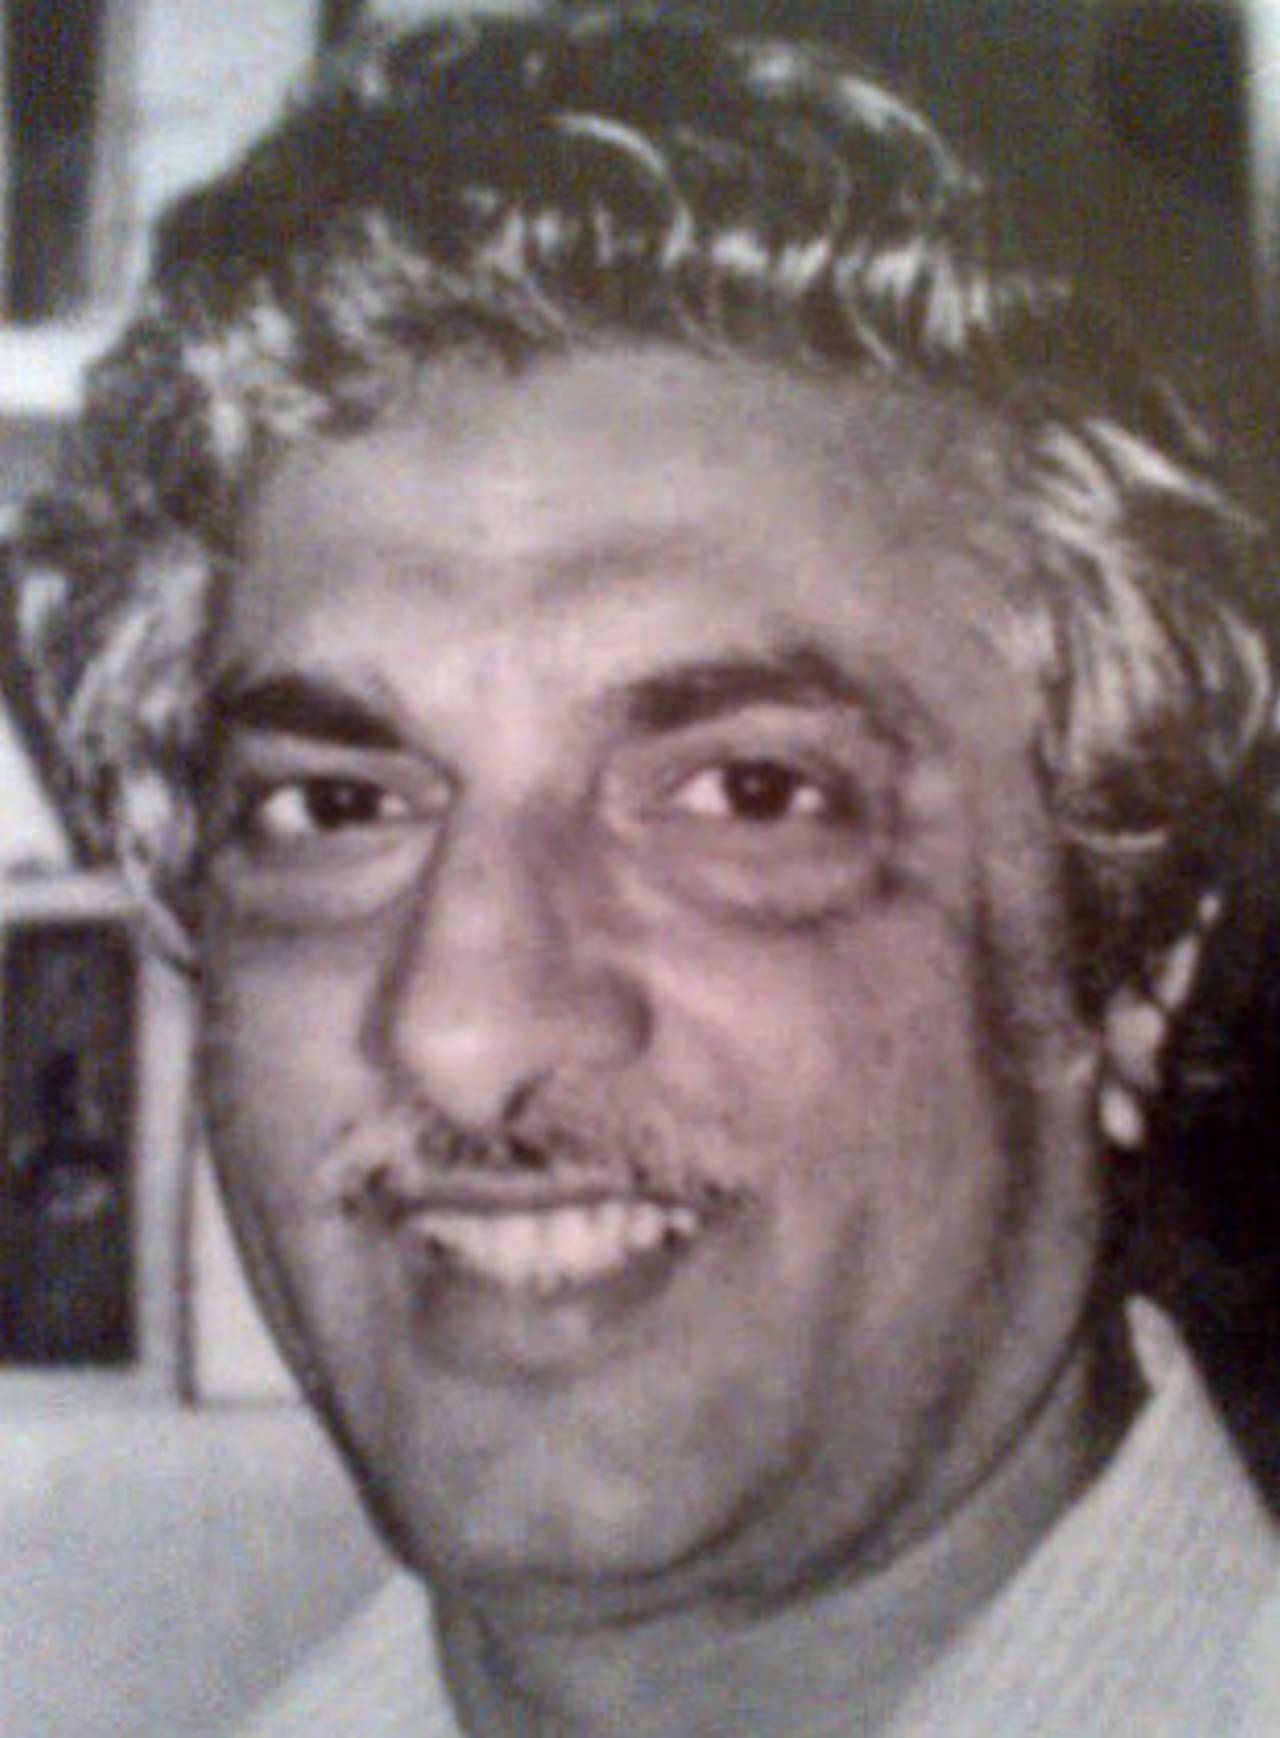 A Haseeb Ahsan portrait from the late 1980s